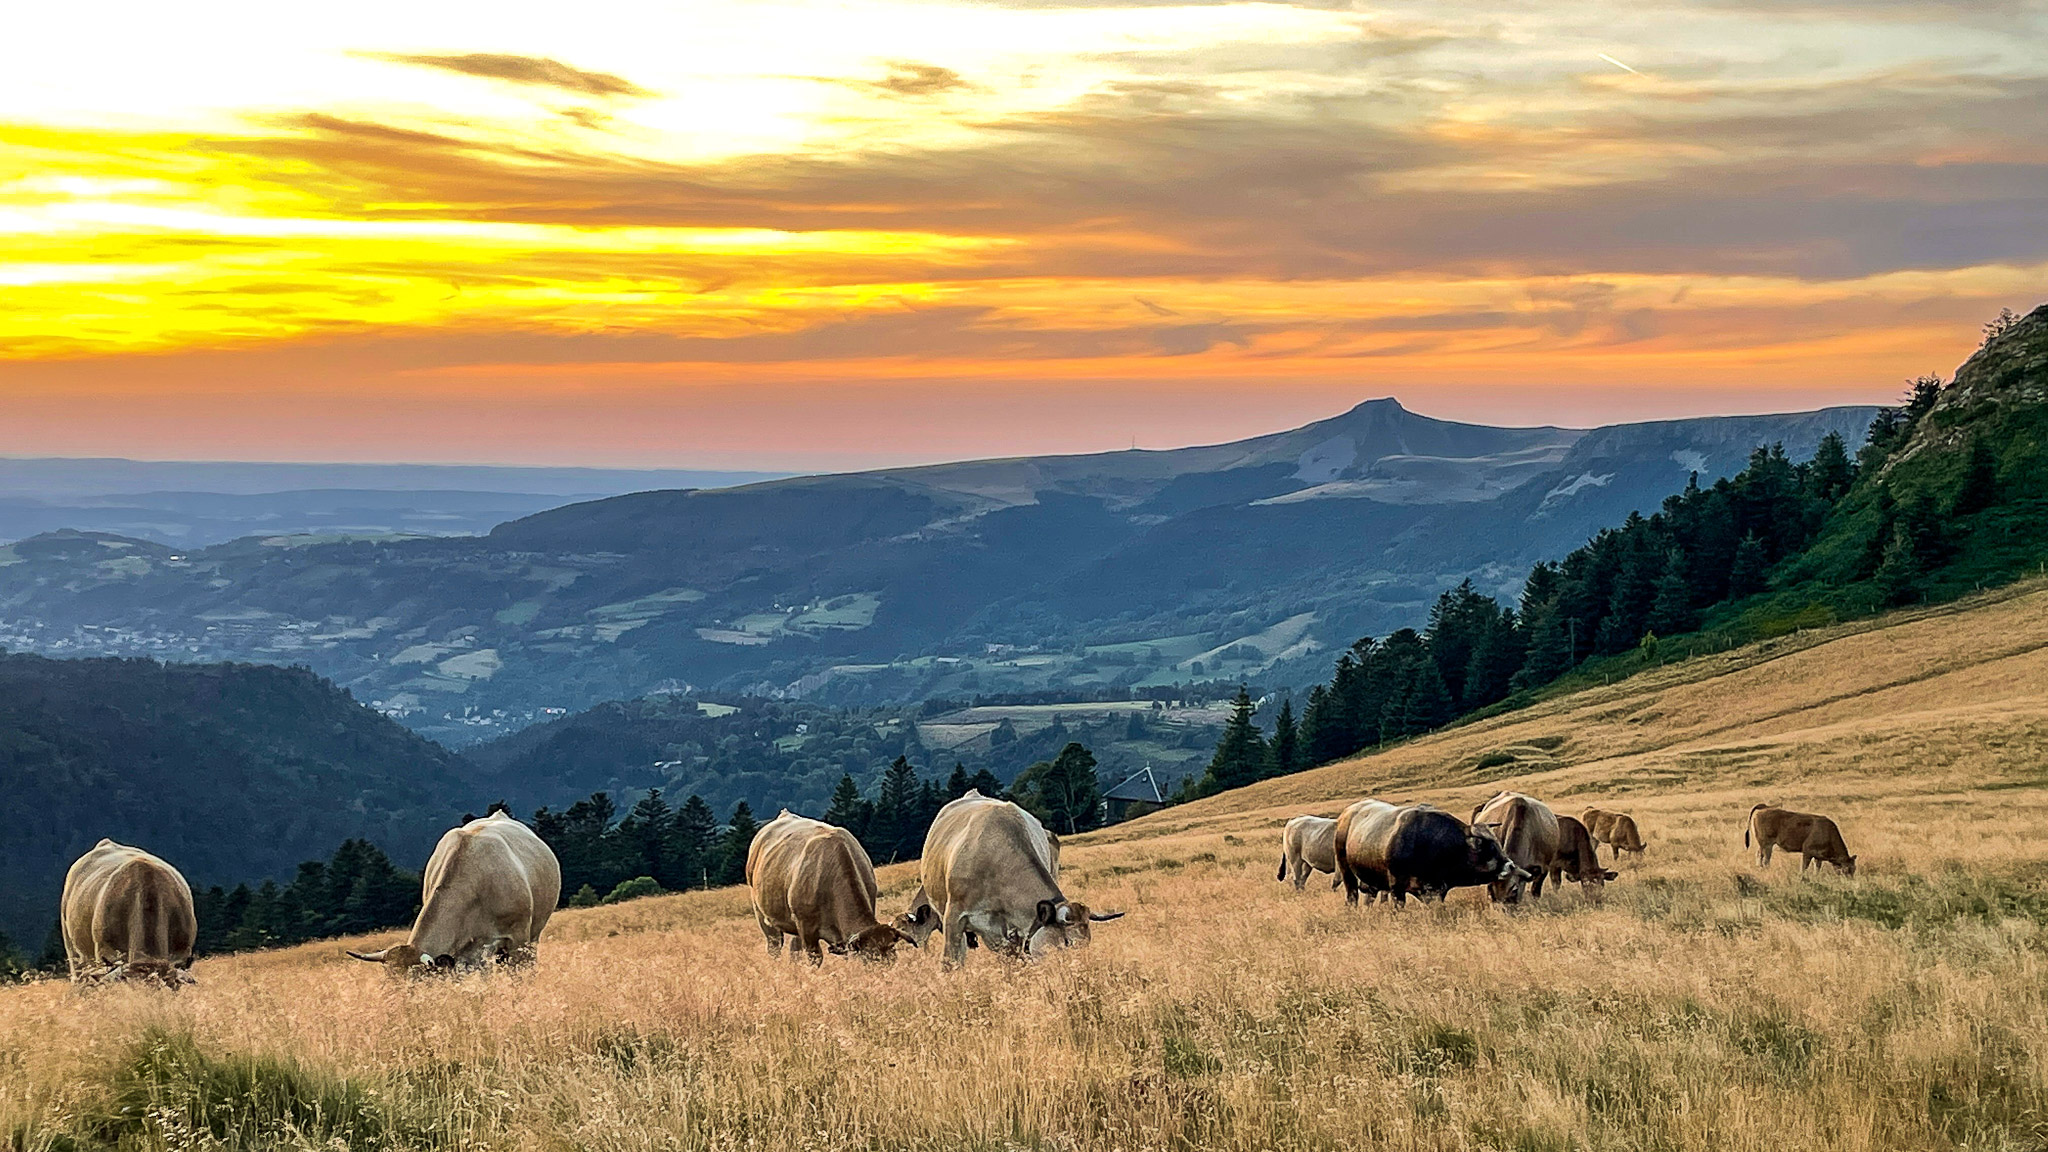 The Sancy Crest Trail, herds in the summer pastures